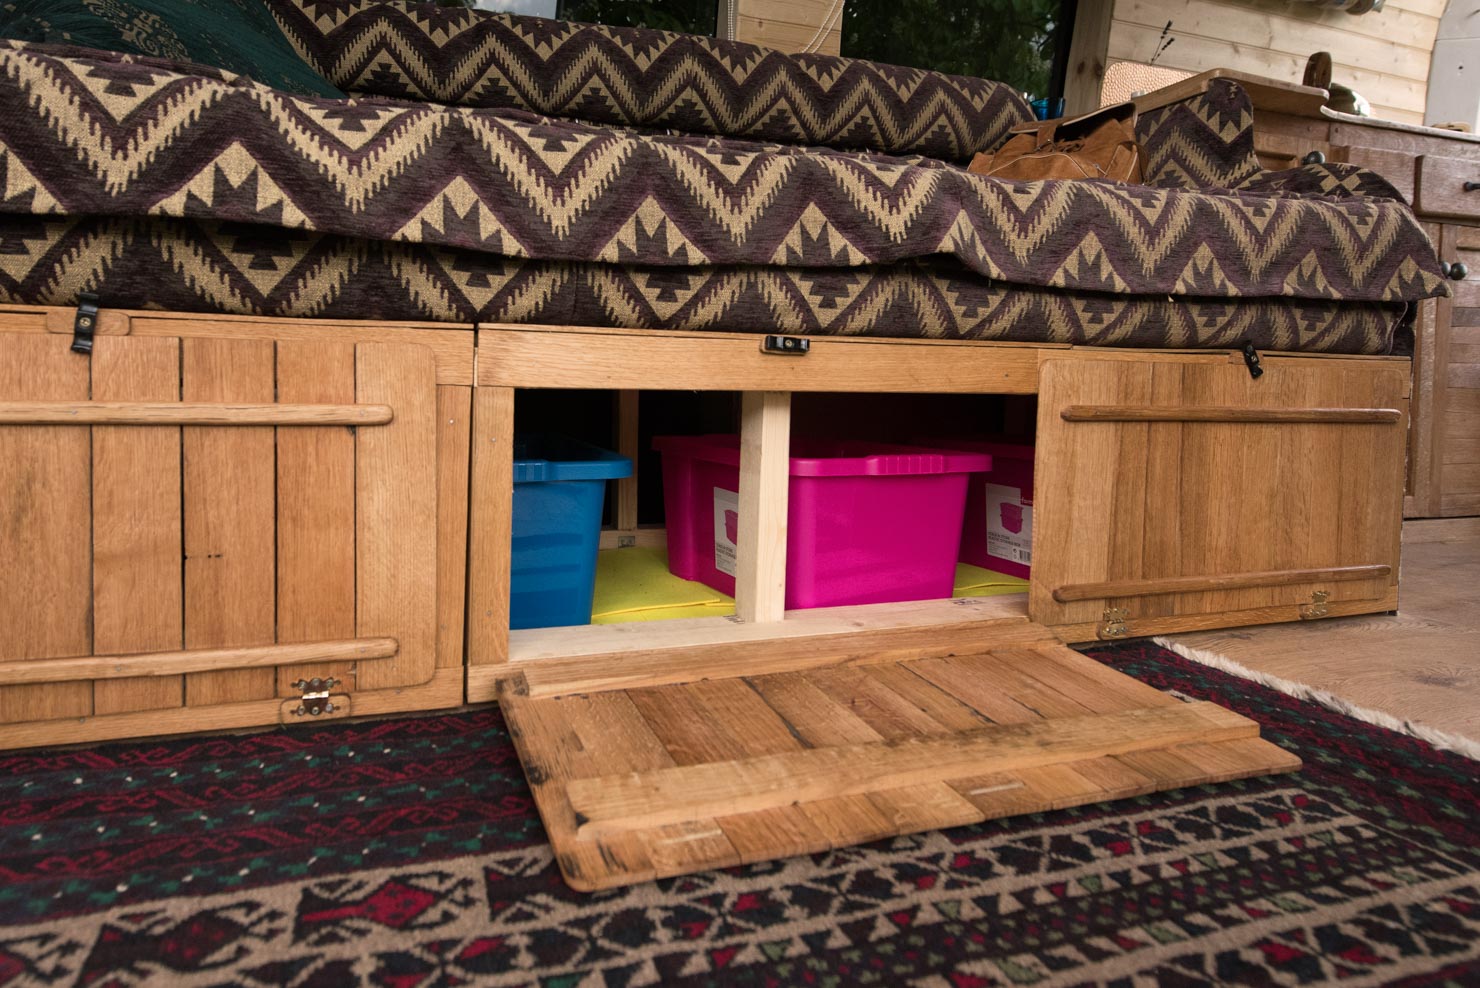 A wooden storage compartment under a cushioned seating area is open, revealing a blue plastic bin and a pink plastic bin inside. The seating has a patterned fabric with earthy tones. The wooden compartment has two hinged doors and a drop-down panel. A patterned rug is visible in the foreground.